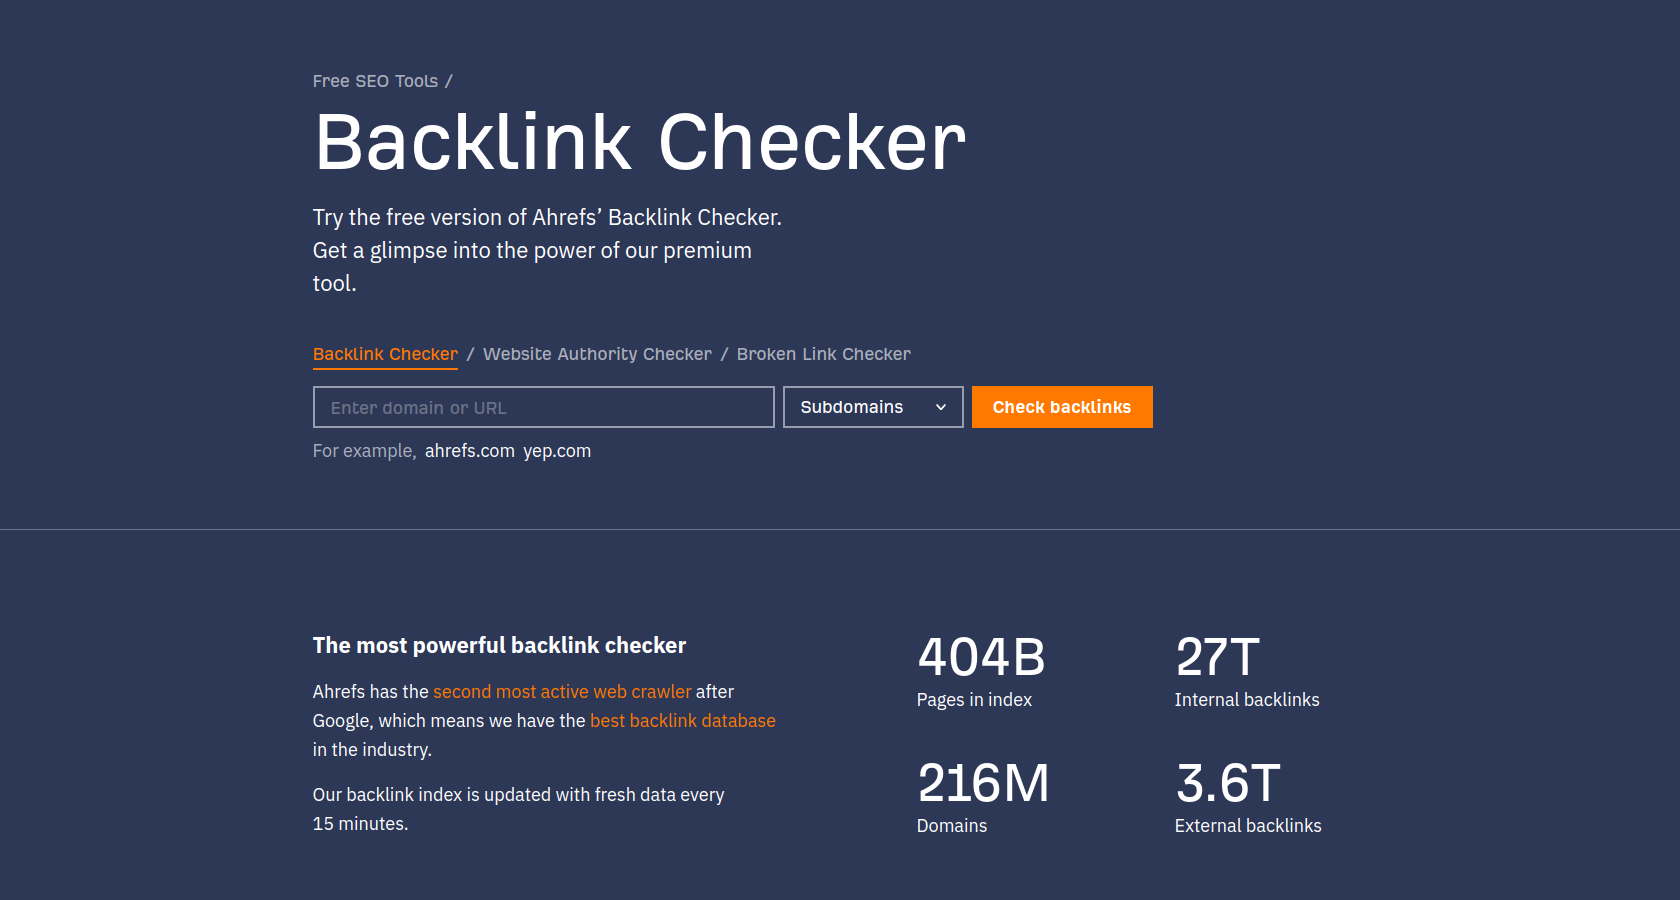 Ahrefs Backlink Checker: The Ultimate Tool for SEO Analysis and Optimization